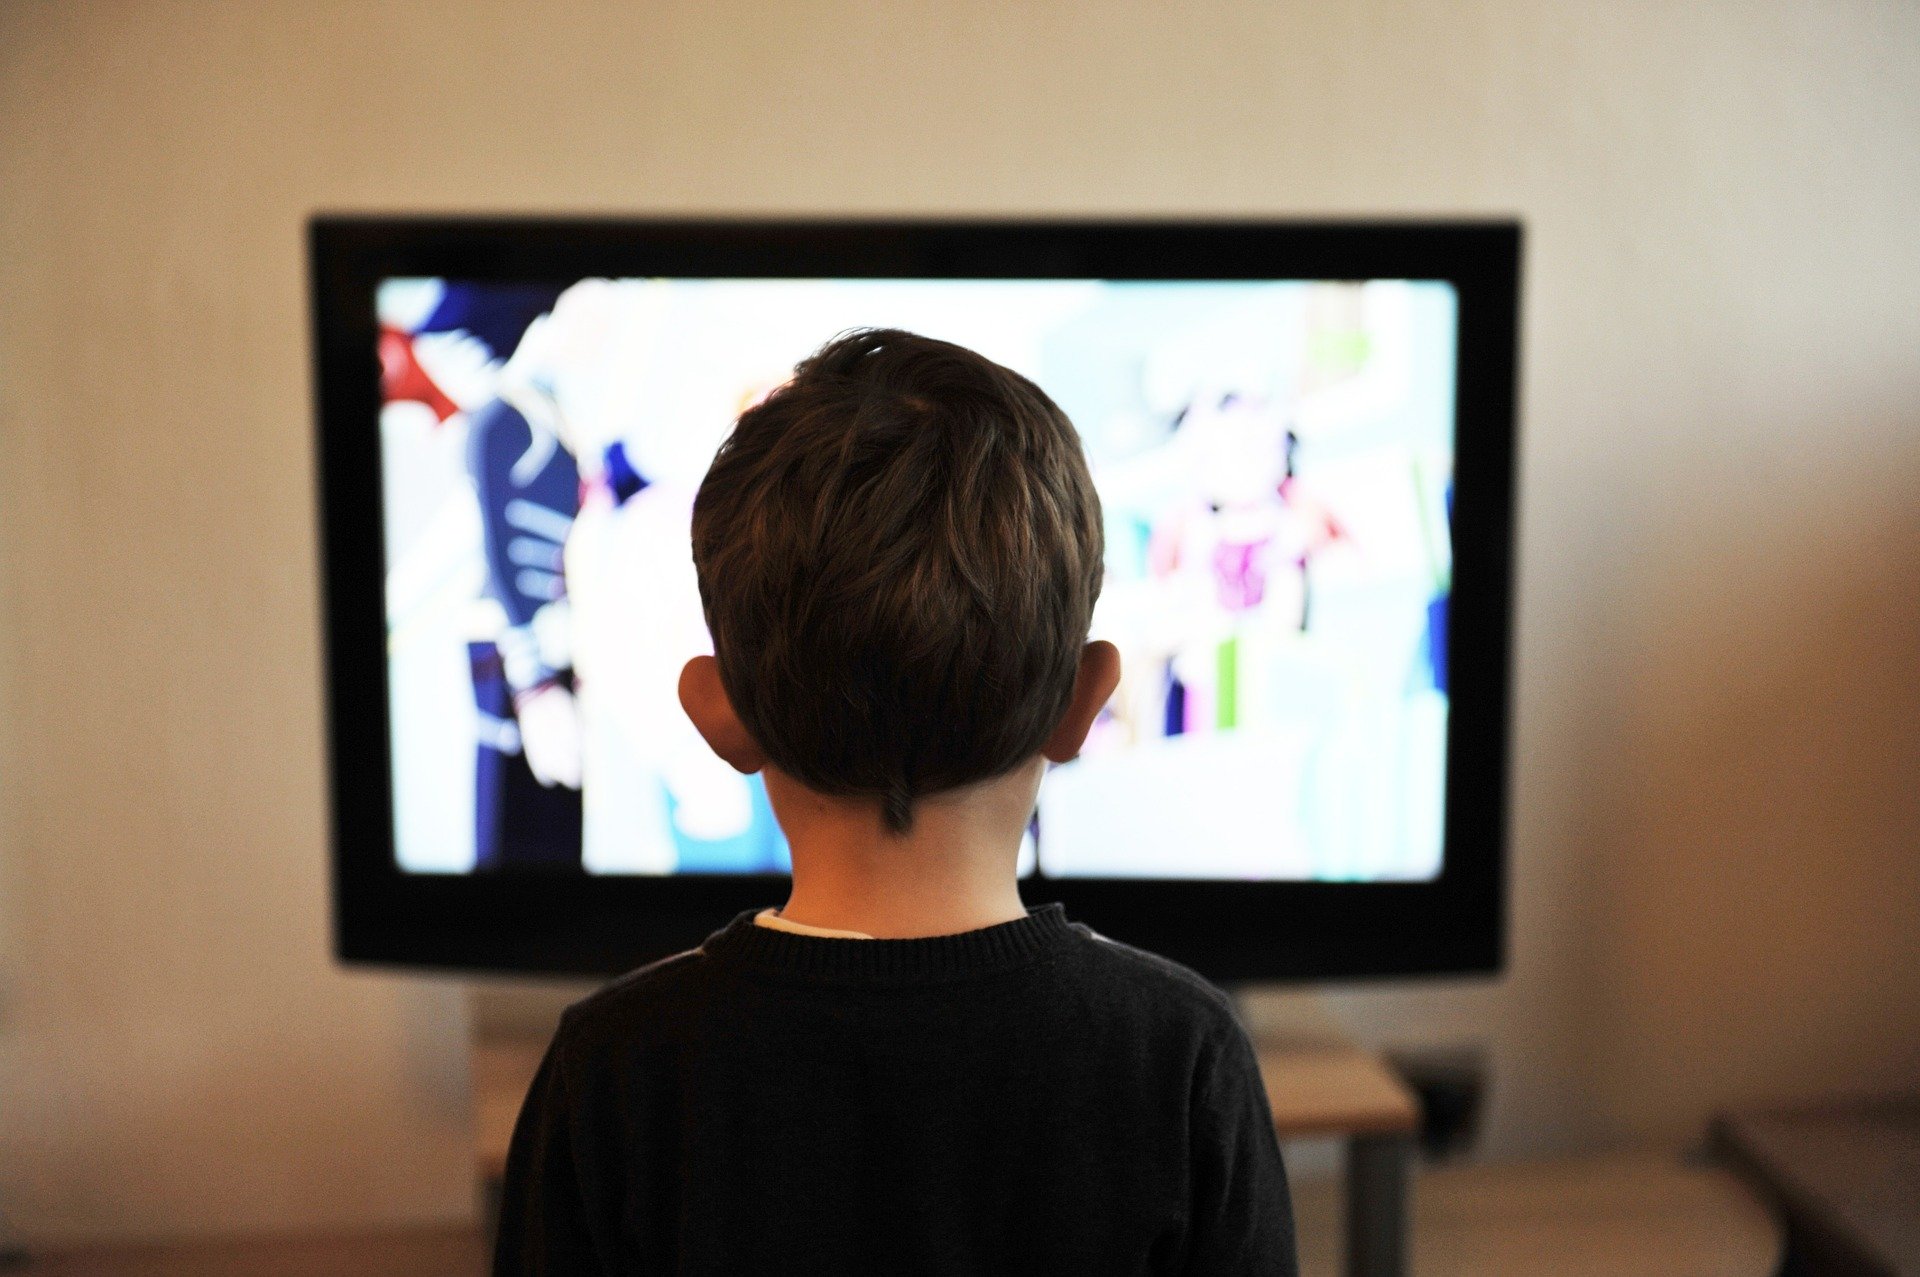 A child facing a television